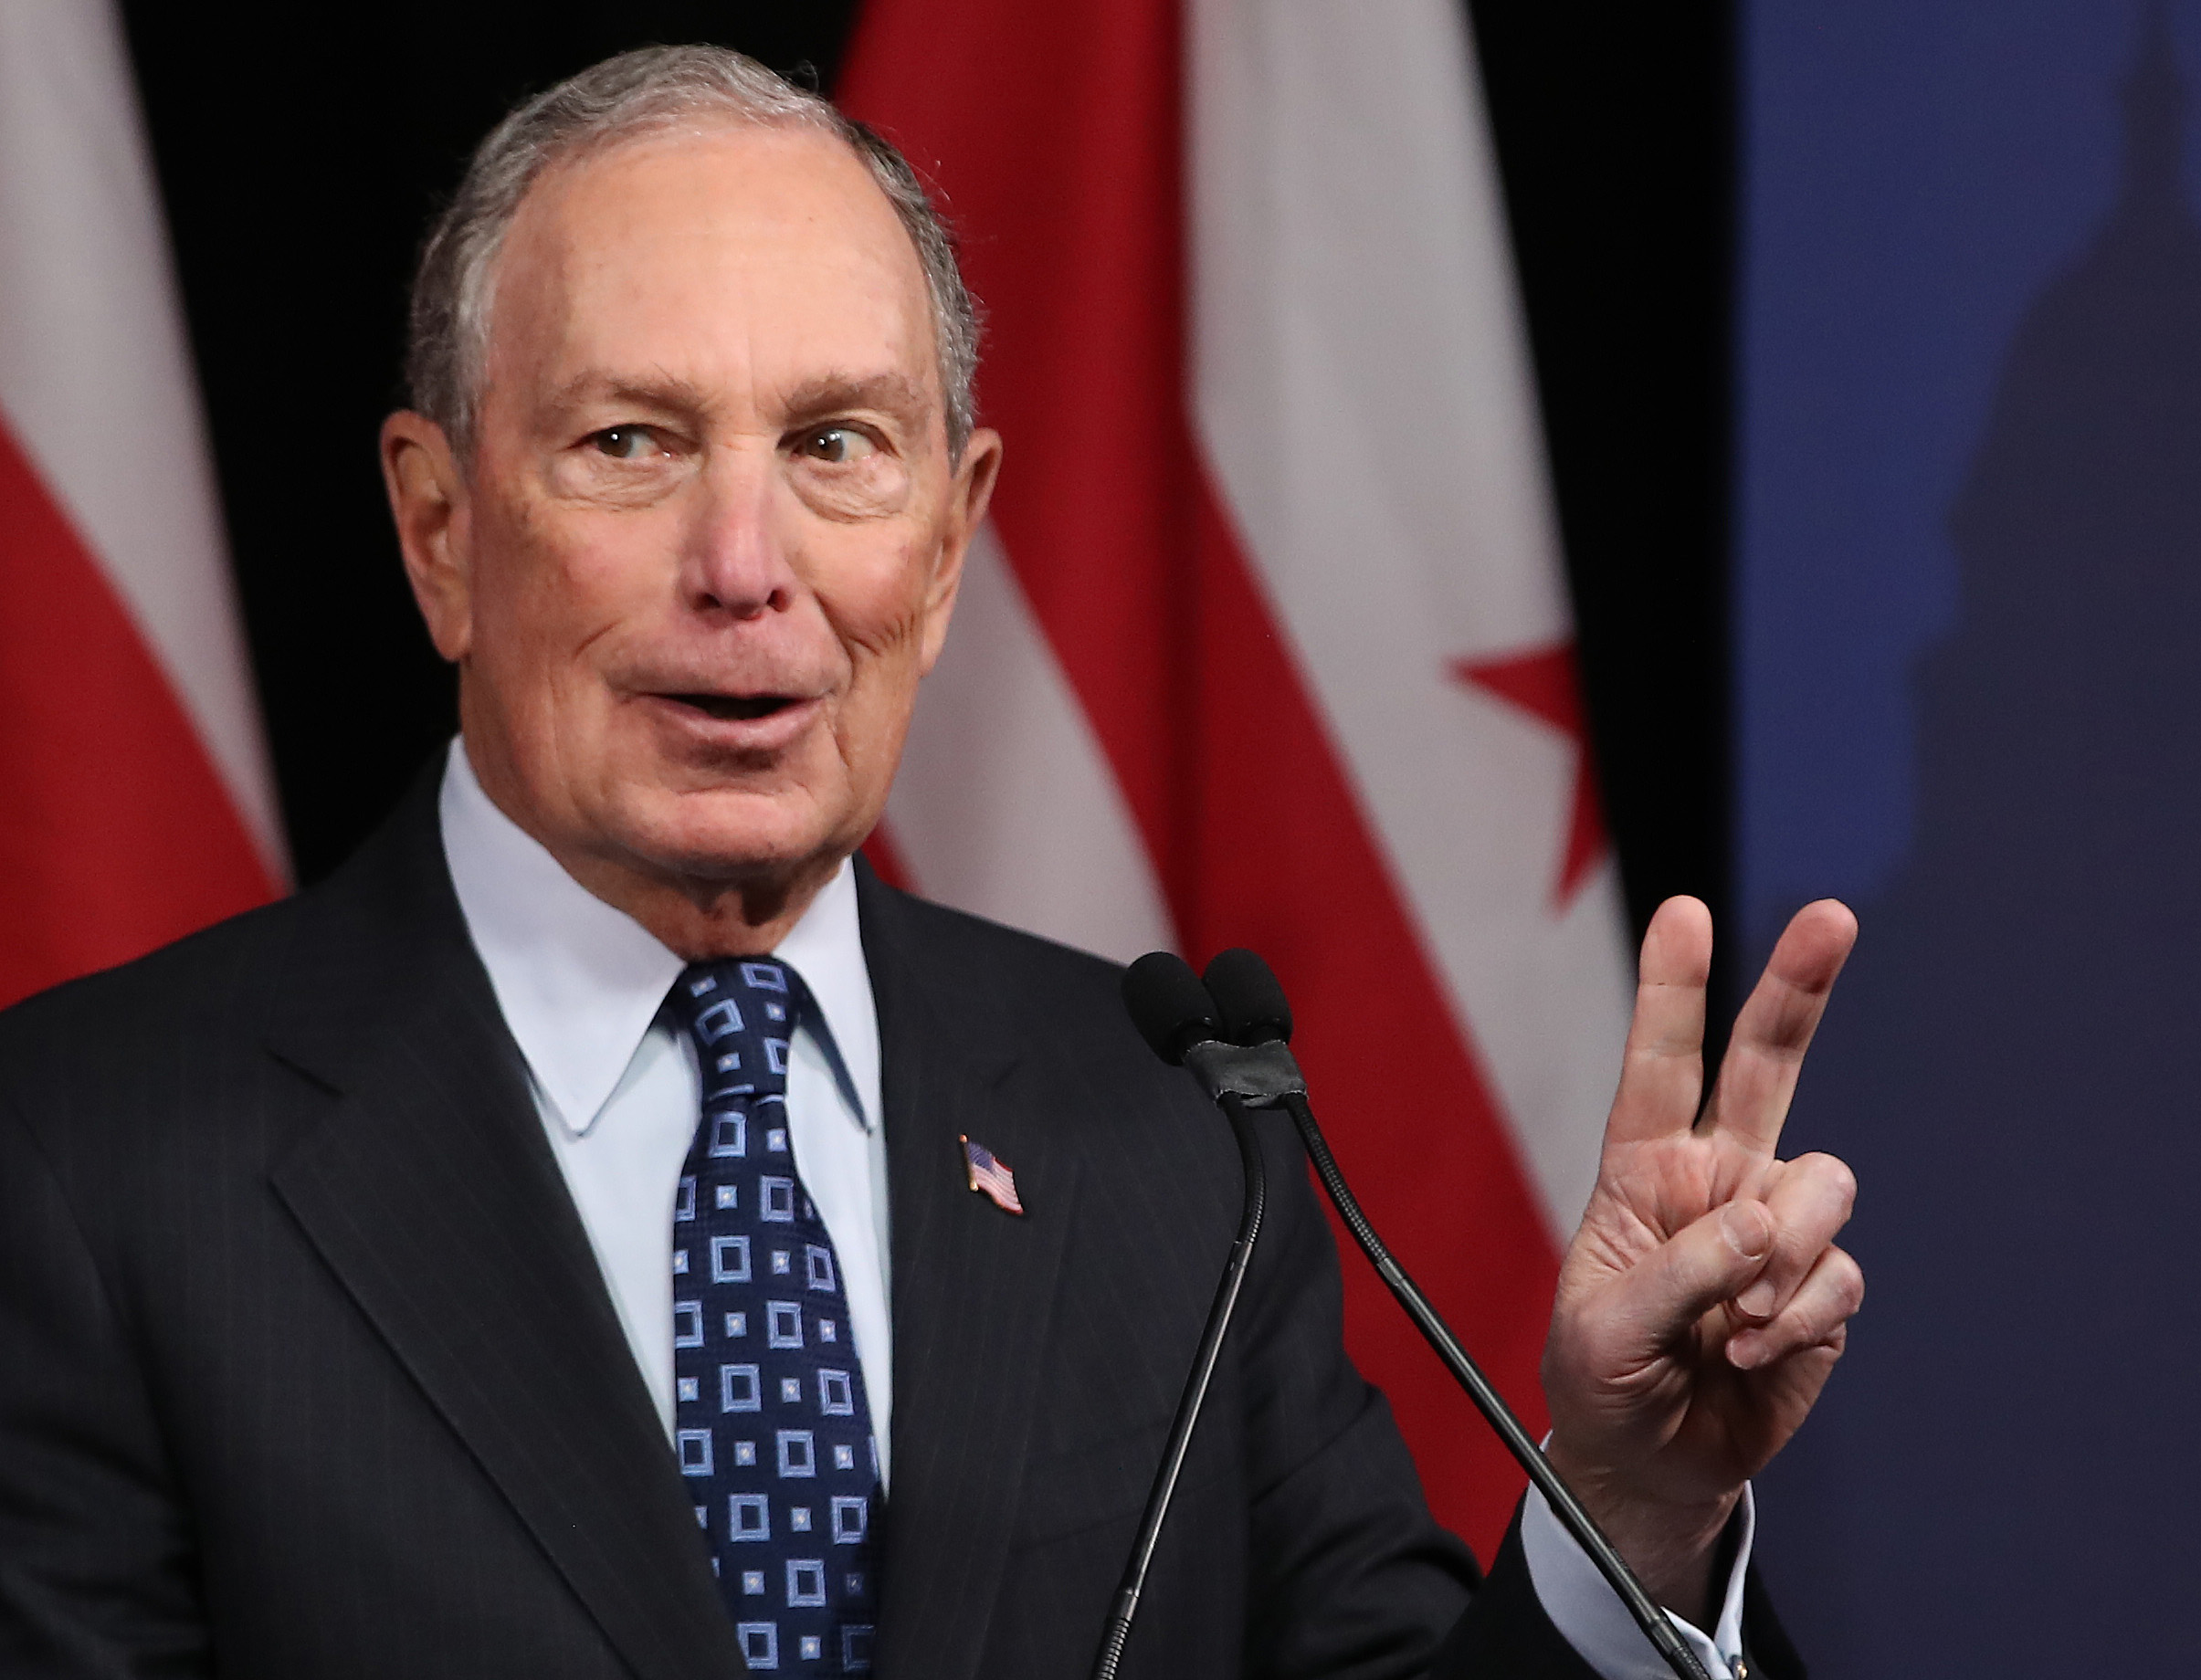 Michael Bloomberg In Fifth Place Ahead Of Kamala Harris, Polls Find